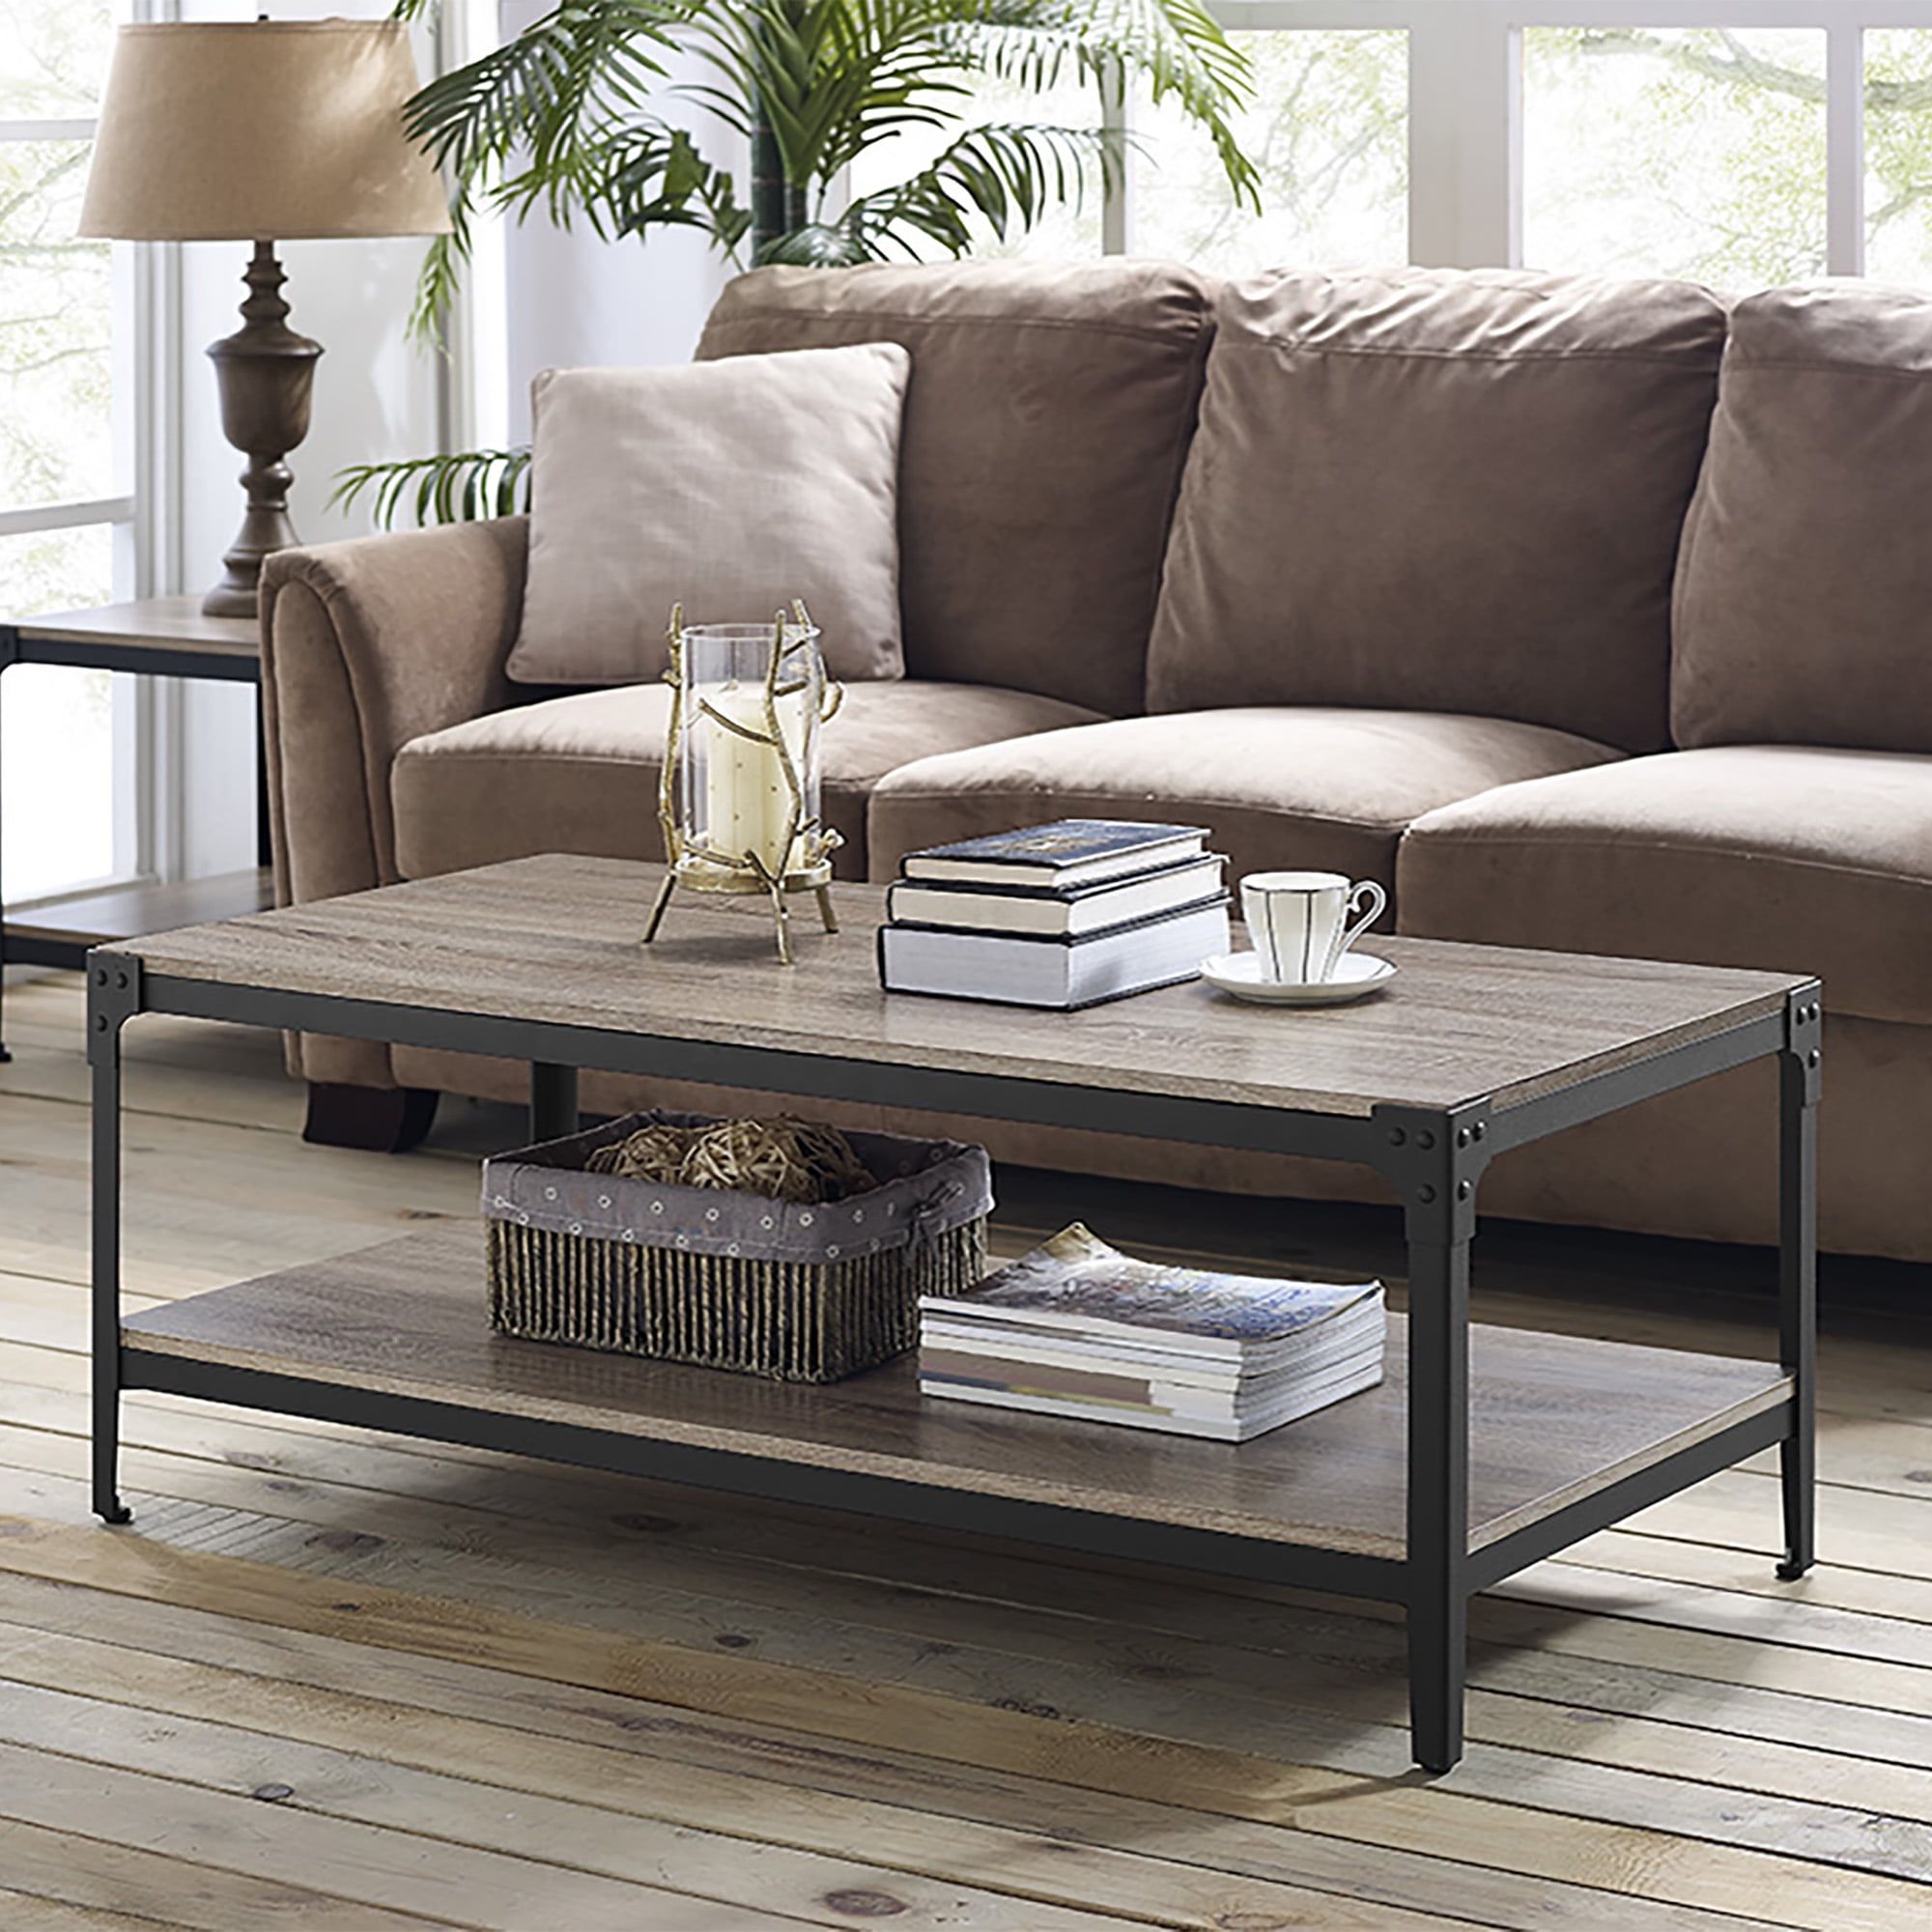 Woven Paths Wilson Angle Iron Rustic Coffee Table, Driftwood – Walmart Throughout Woven Paths Coffee Tables (Gallery 14 of 20)